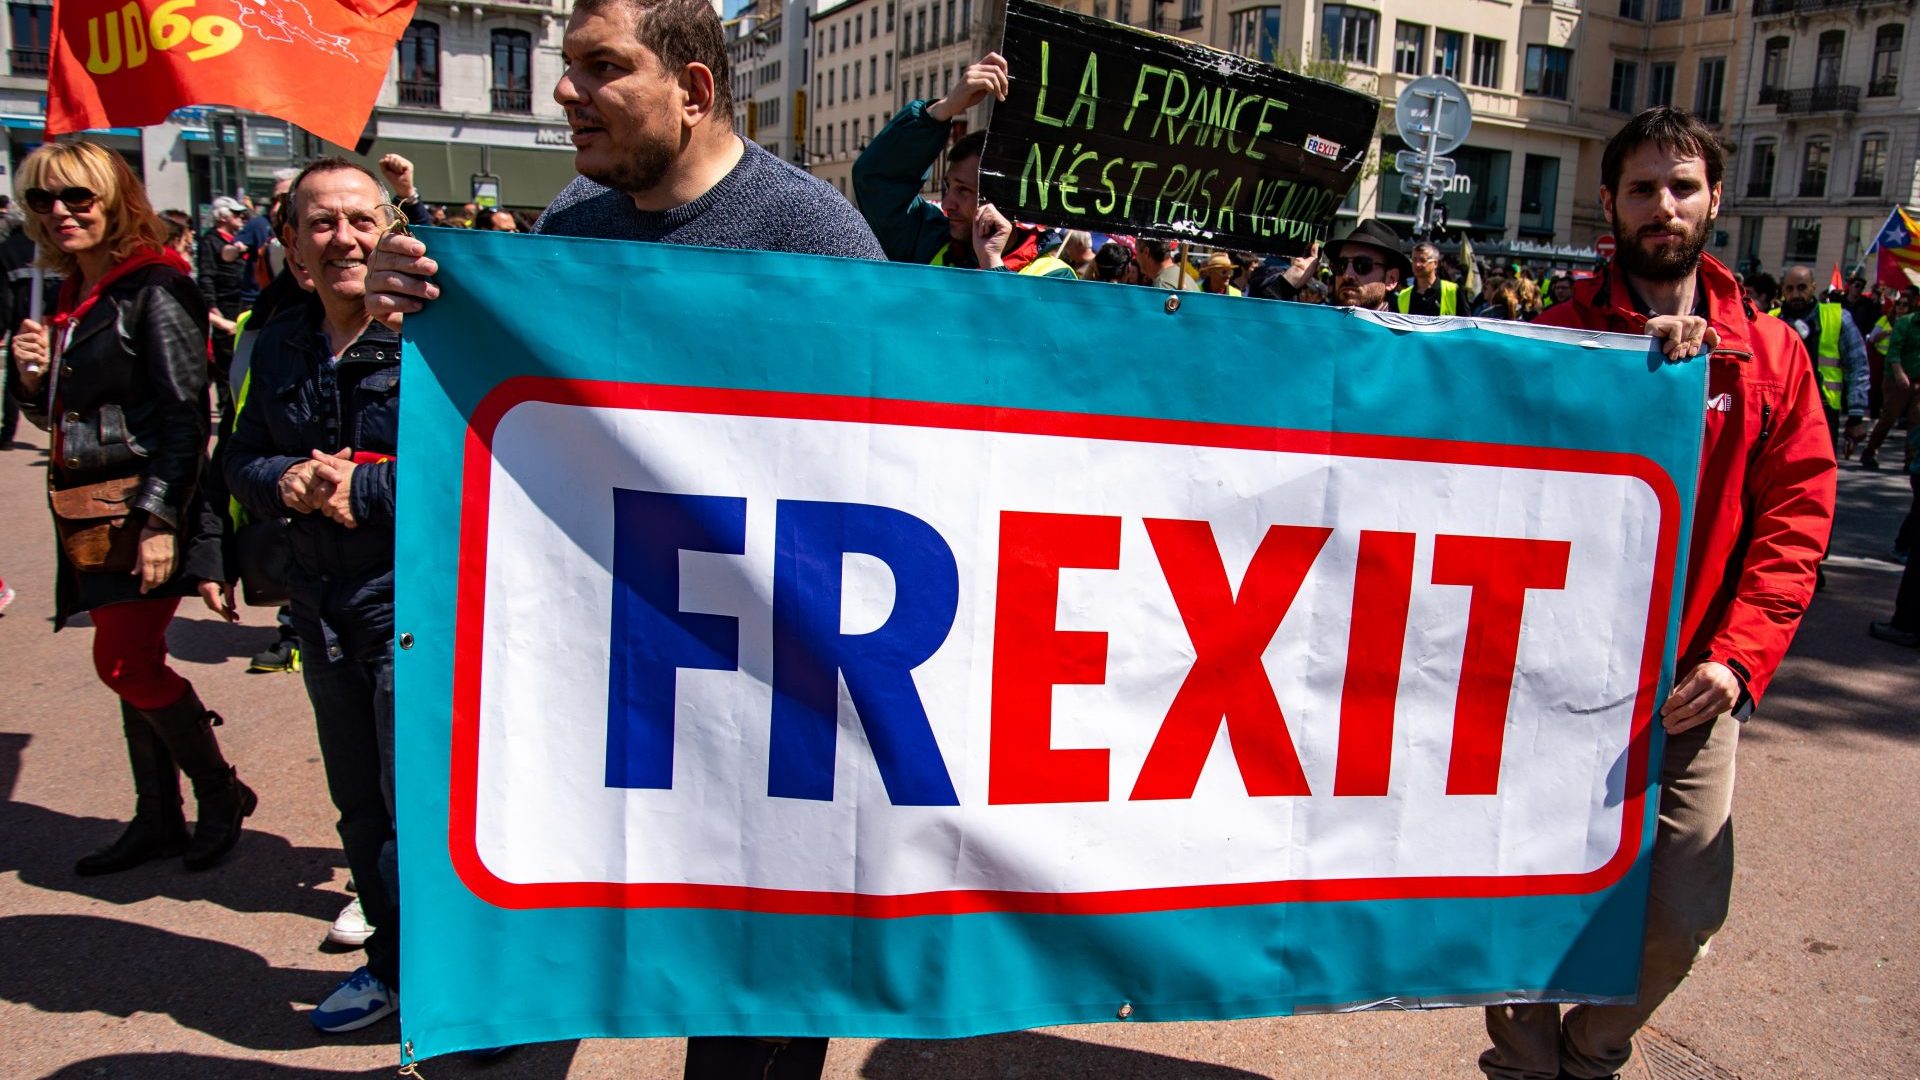 A banner saying "FREXIT" during an anti-government demonstration in Lyon, France, in 2019 (Photo by Robert DEYRAIL/Gamma-Rapho via Getty Images)